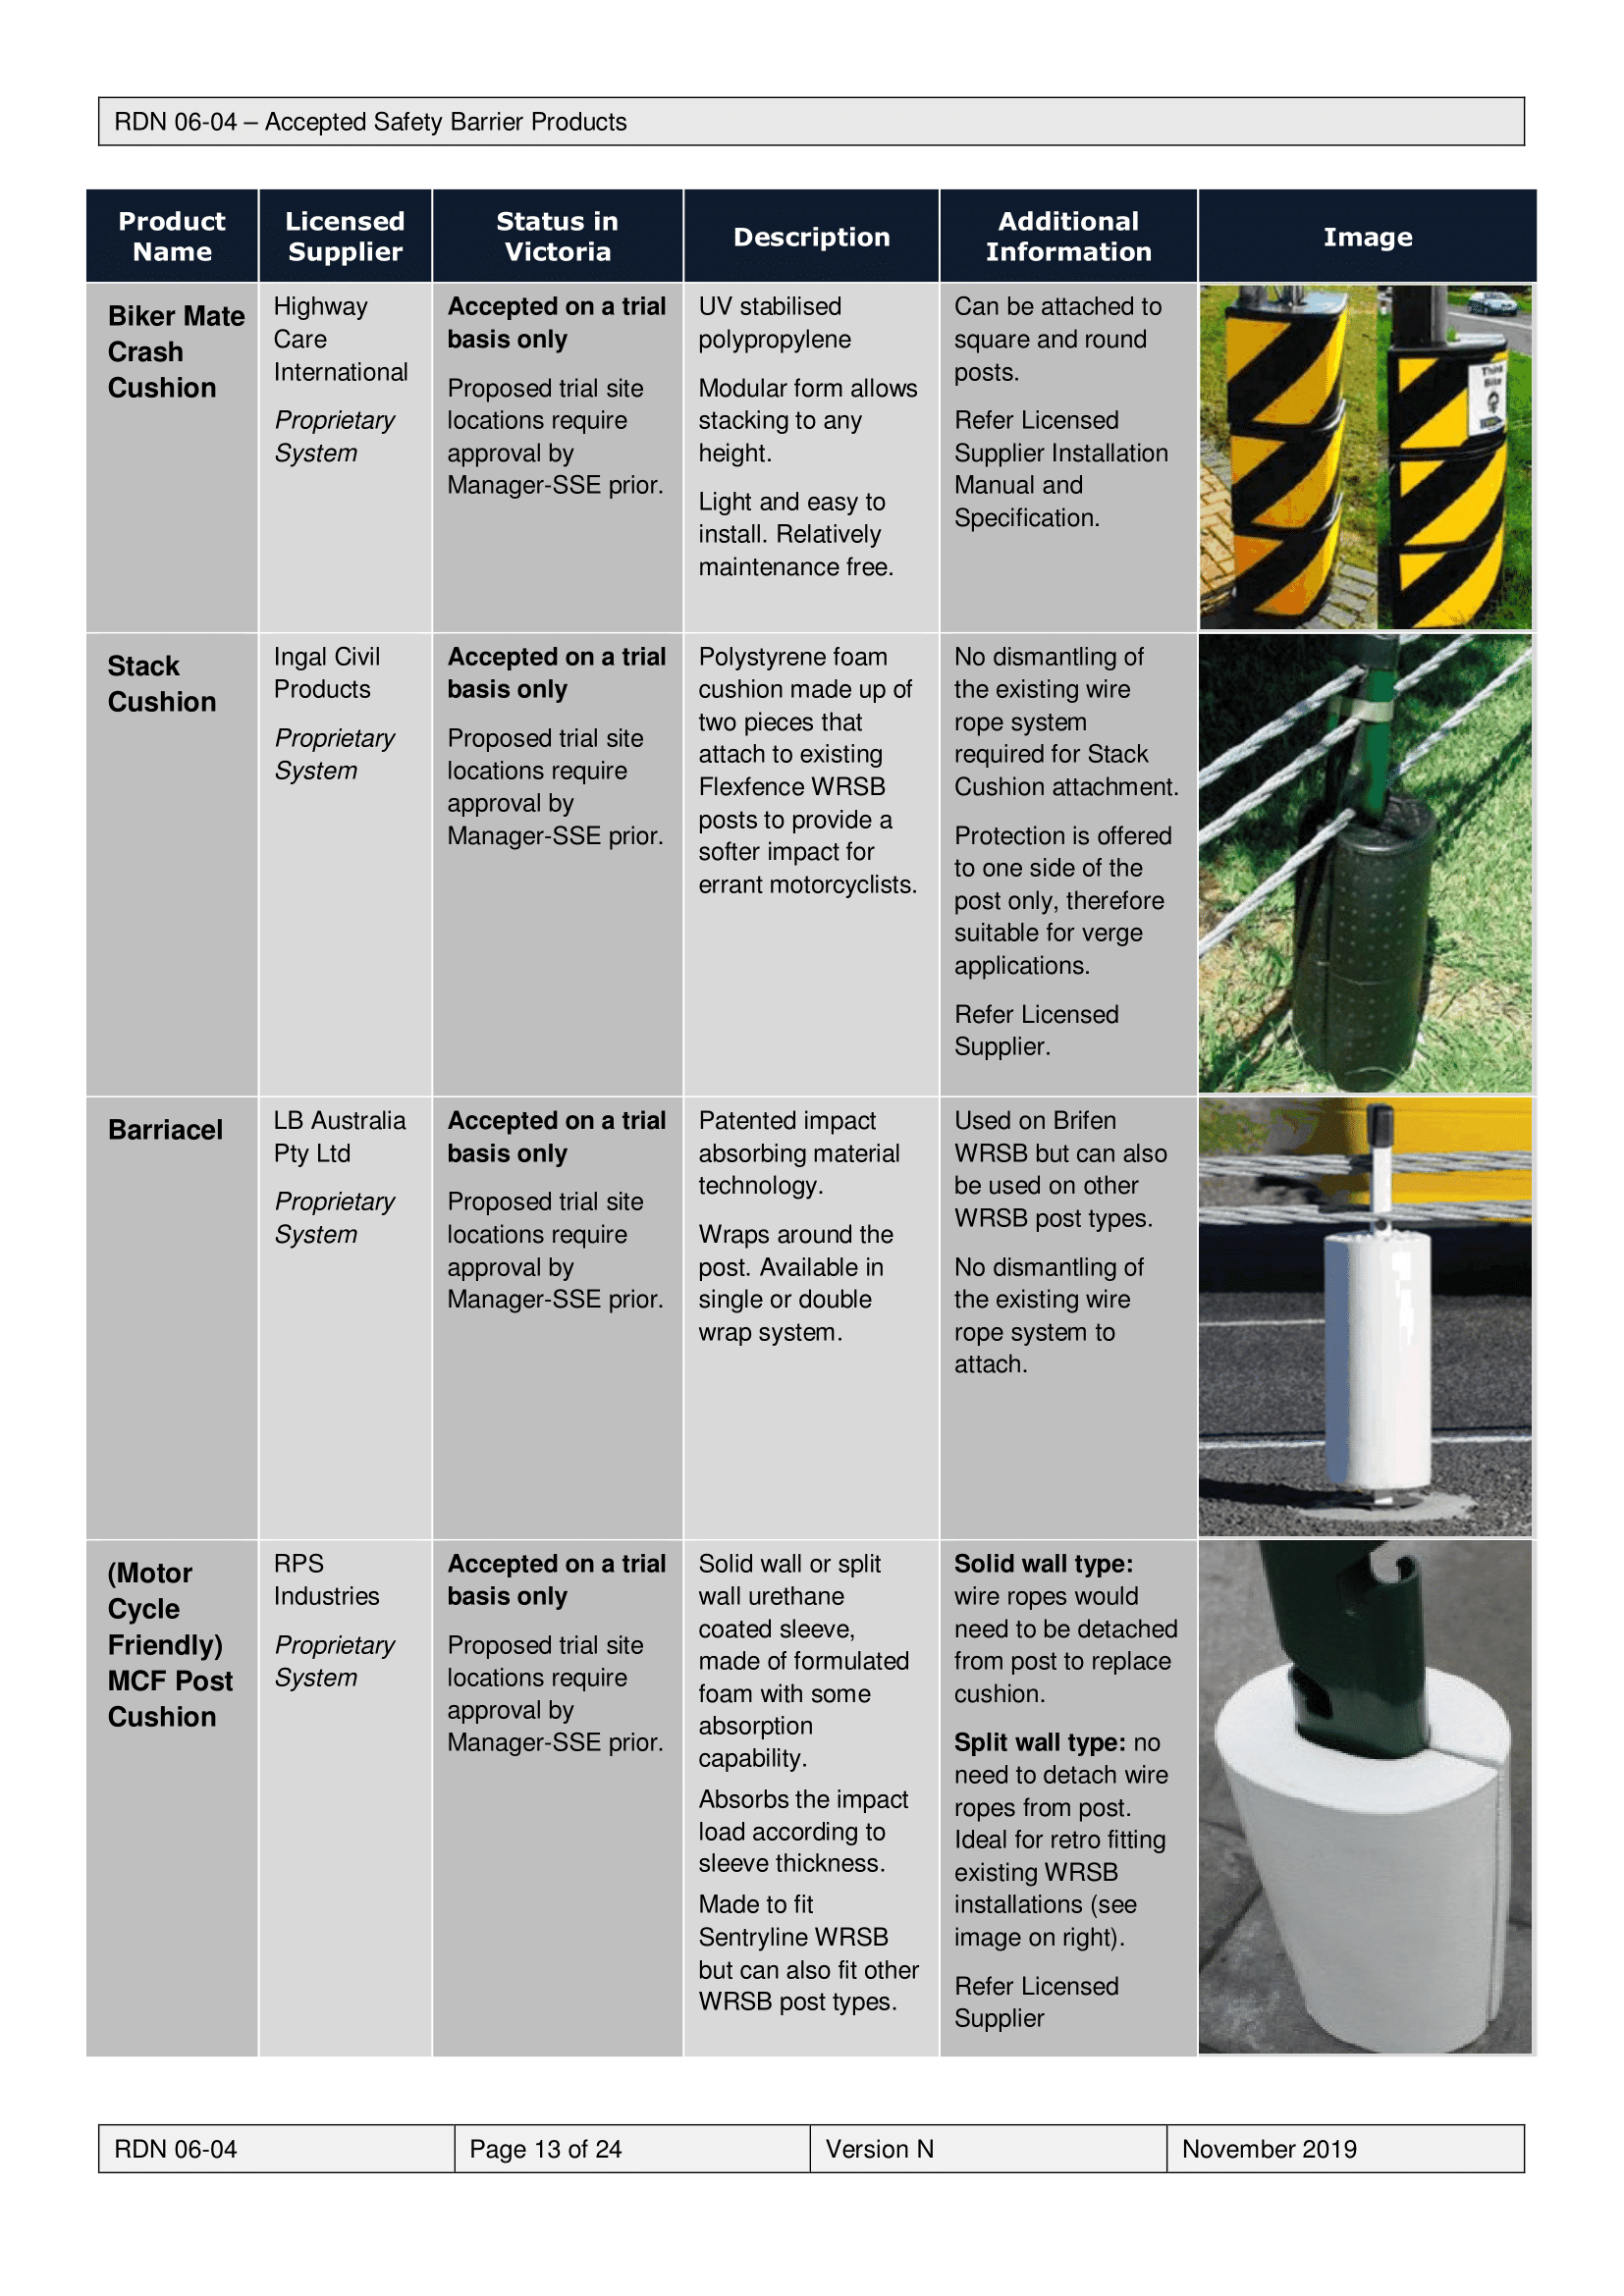 Road Design Note 0604 N Accepted Safety Barrier Products 11 2019-13